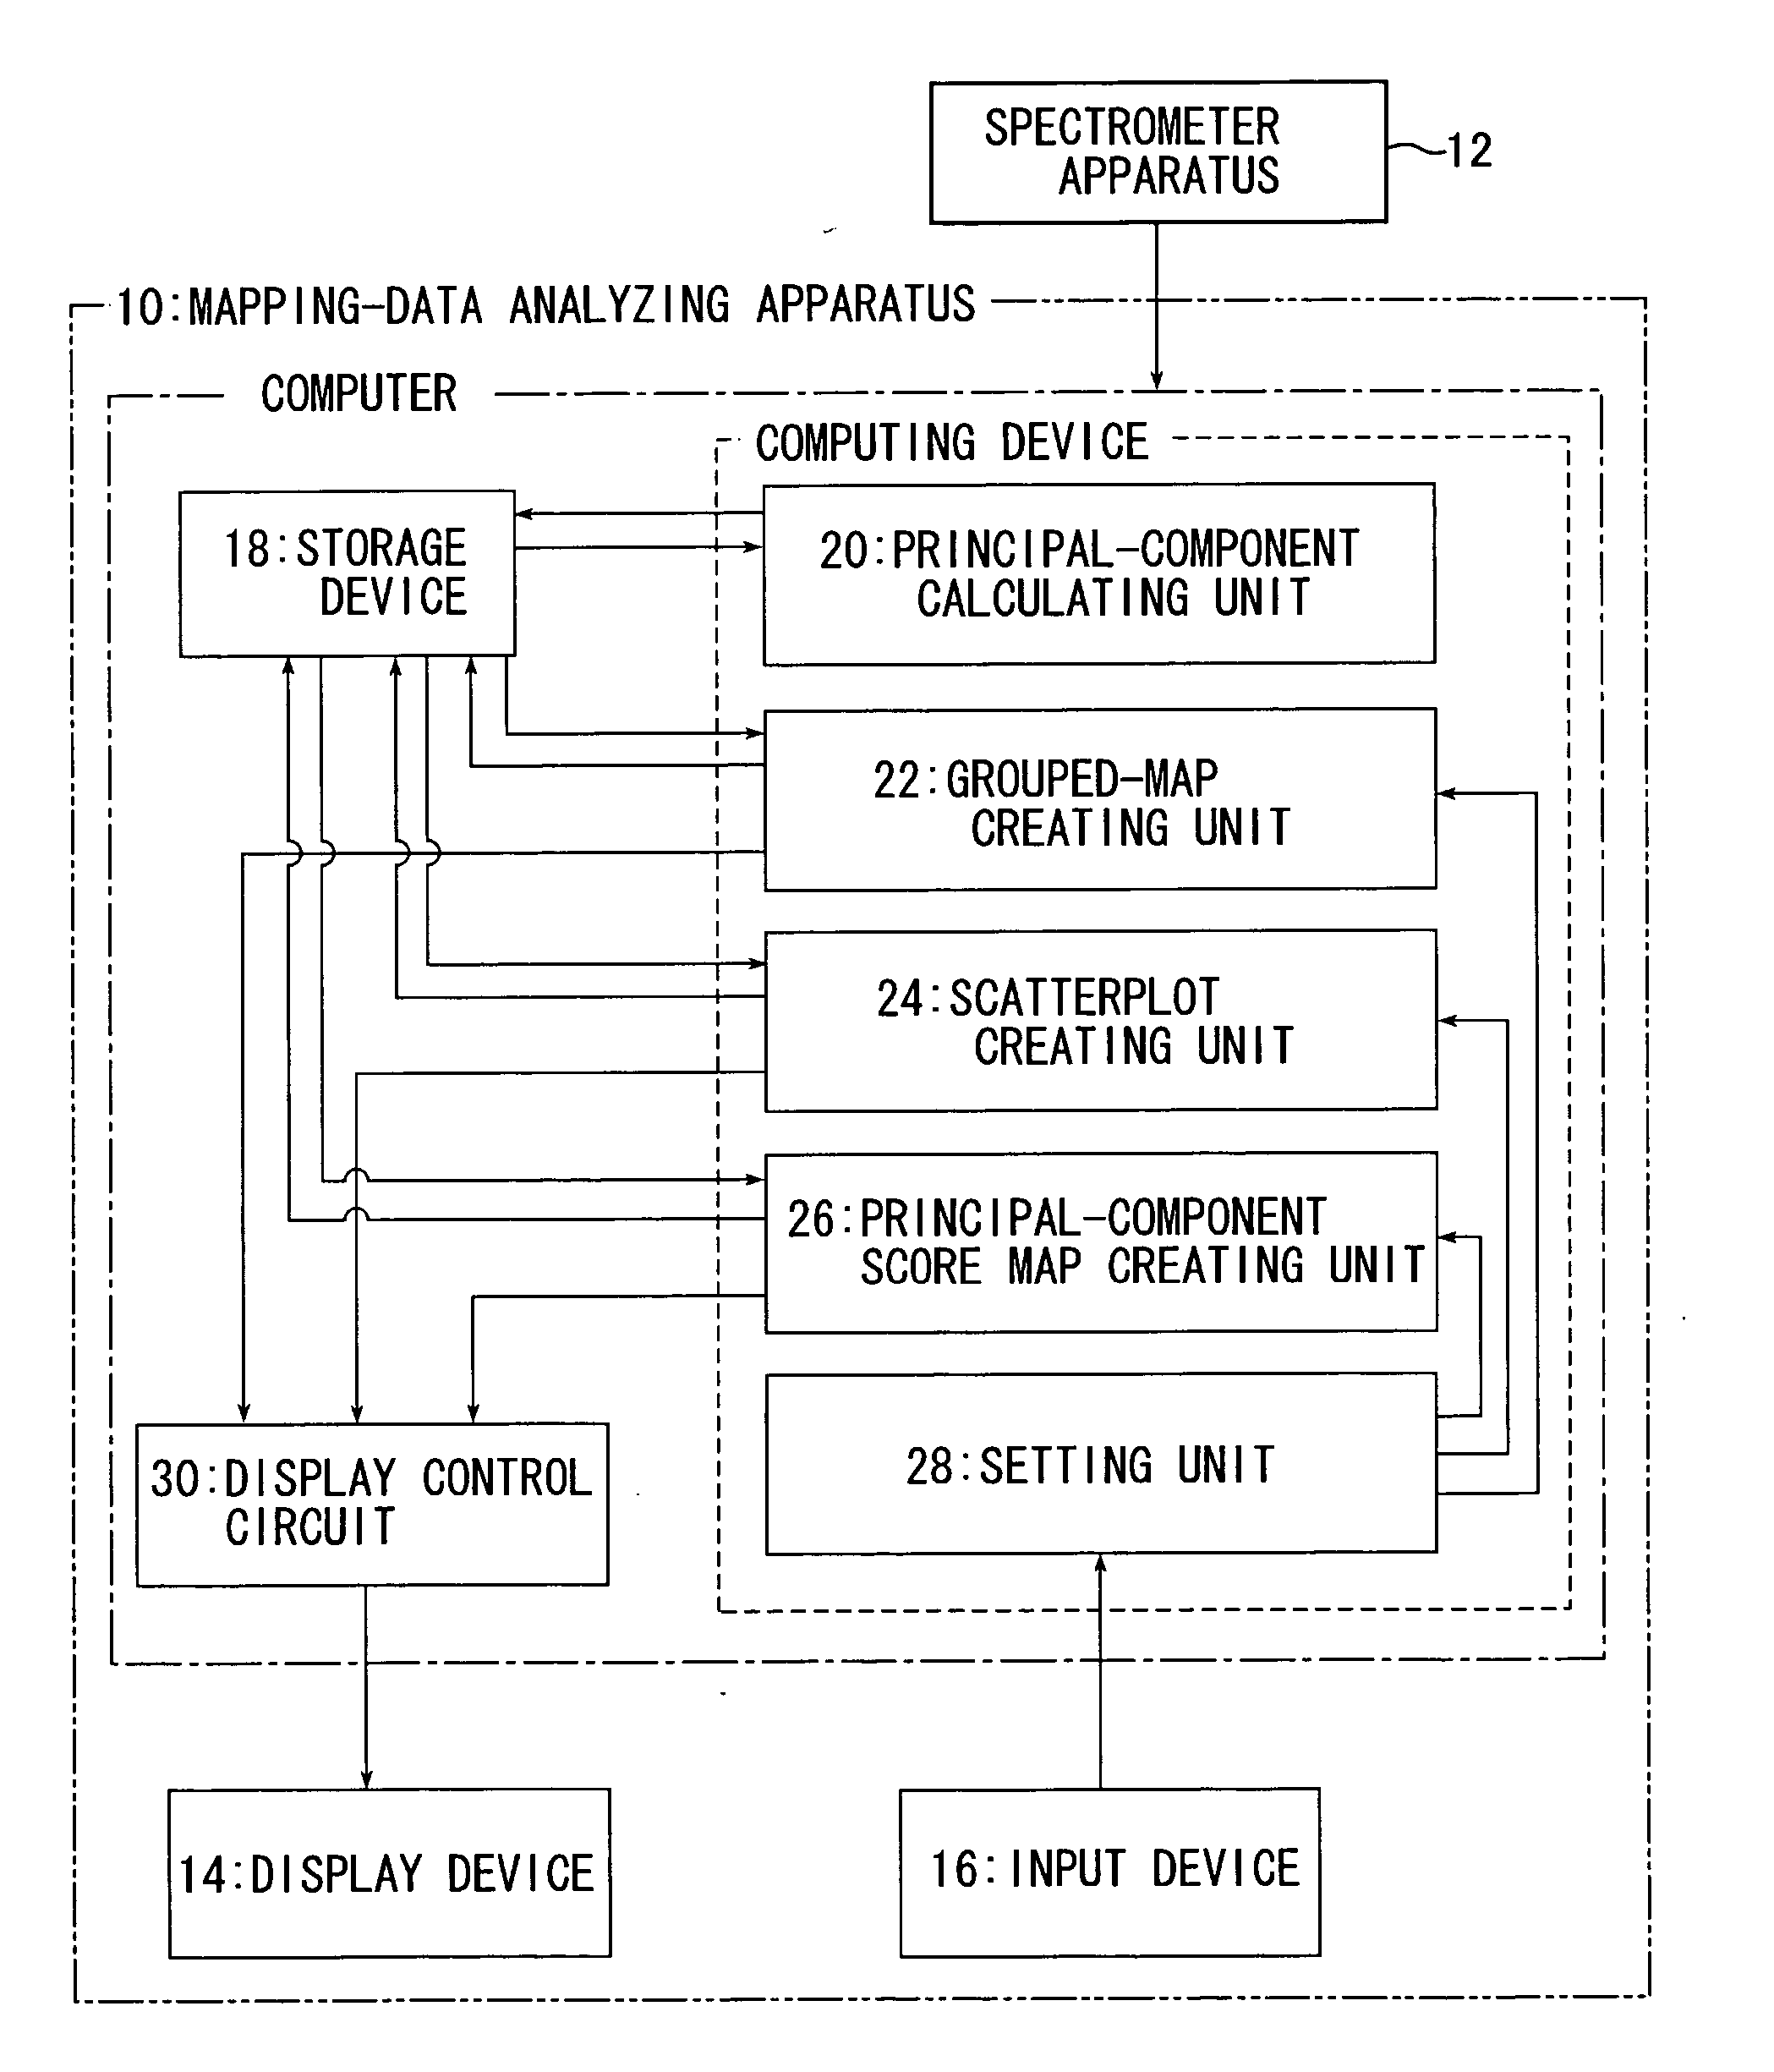 Mapping-data analyzing method and apparatus